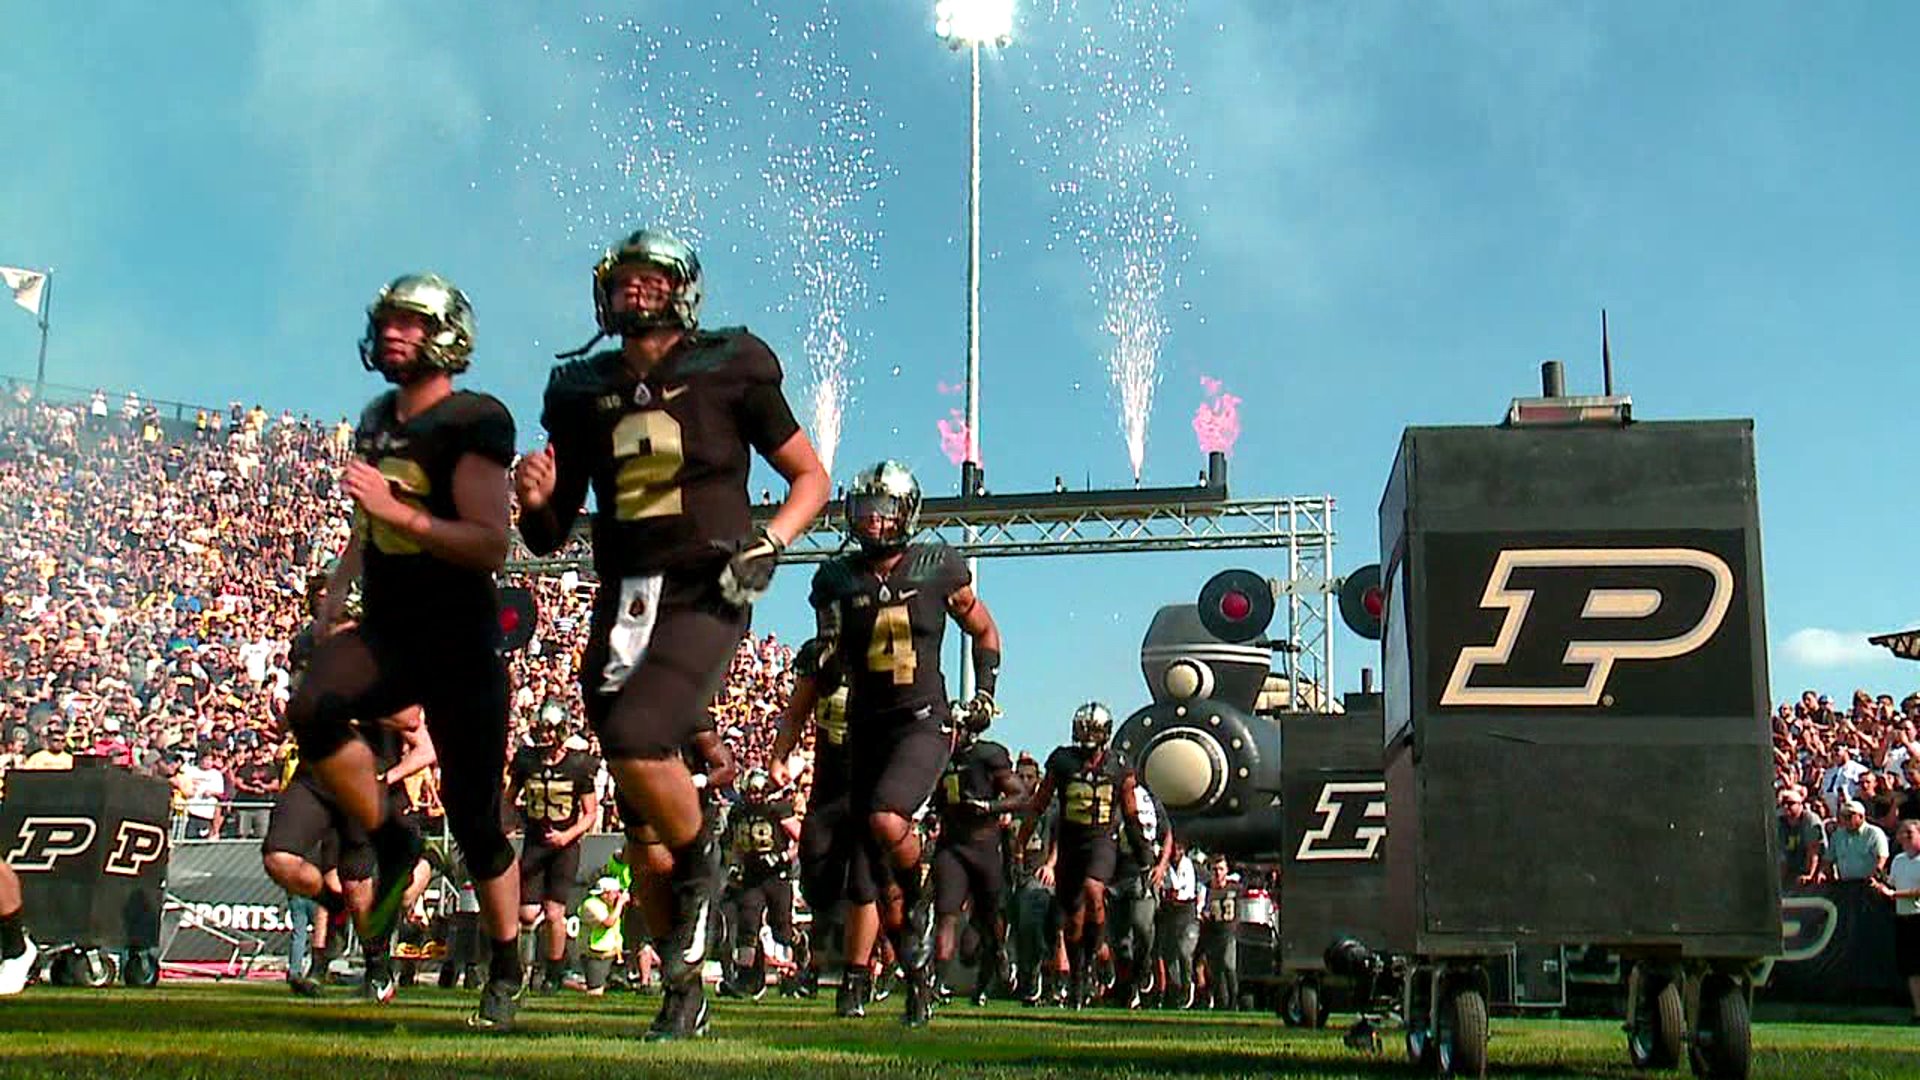 Purdue to hold donation drive at football game to help with Hurricane Dorian relief